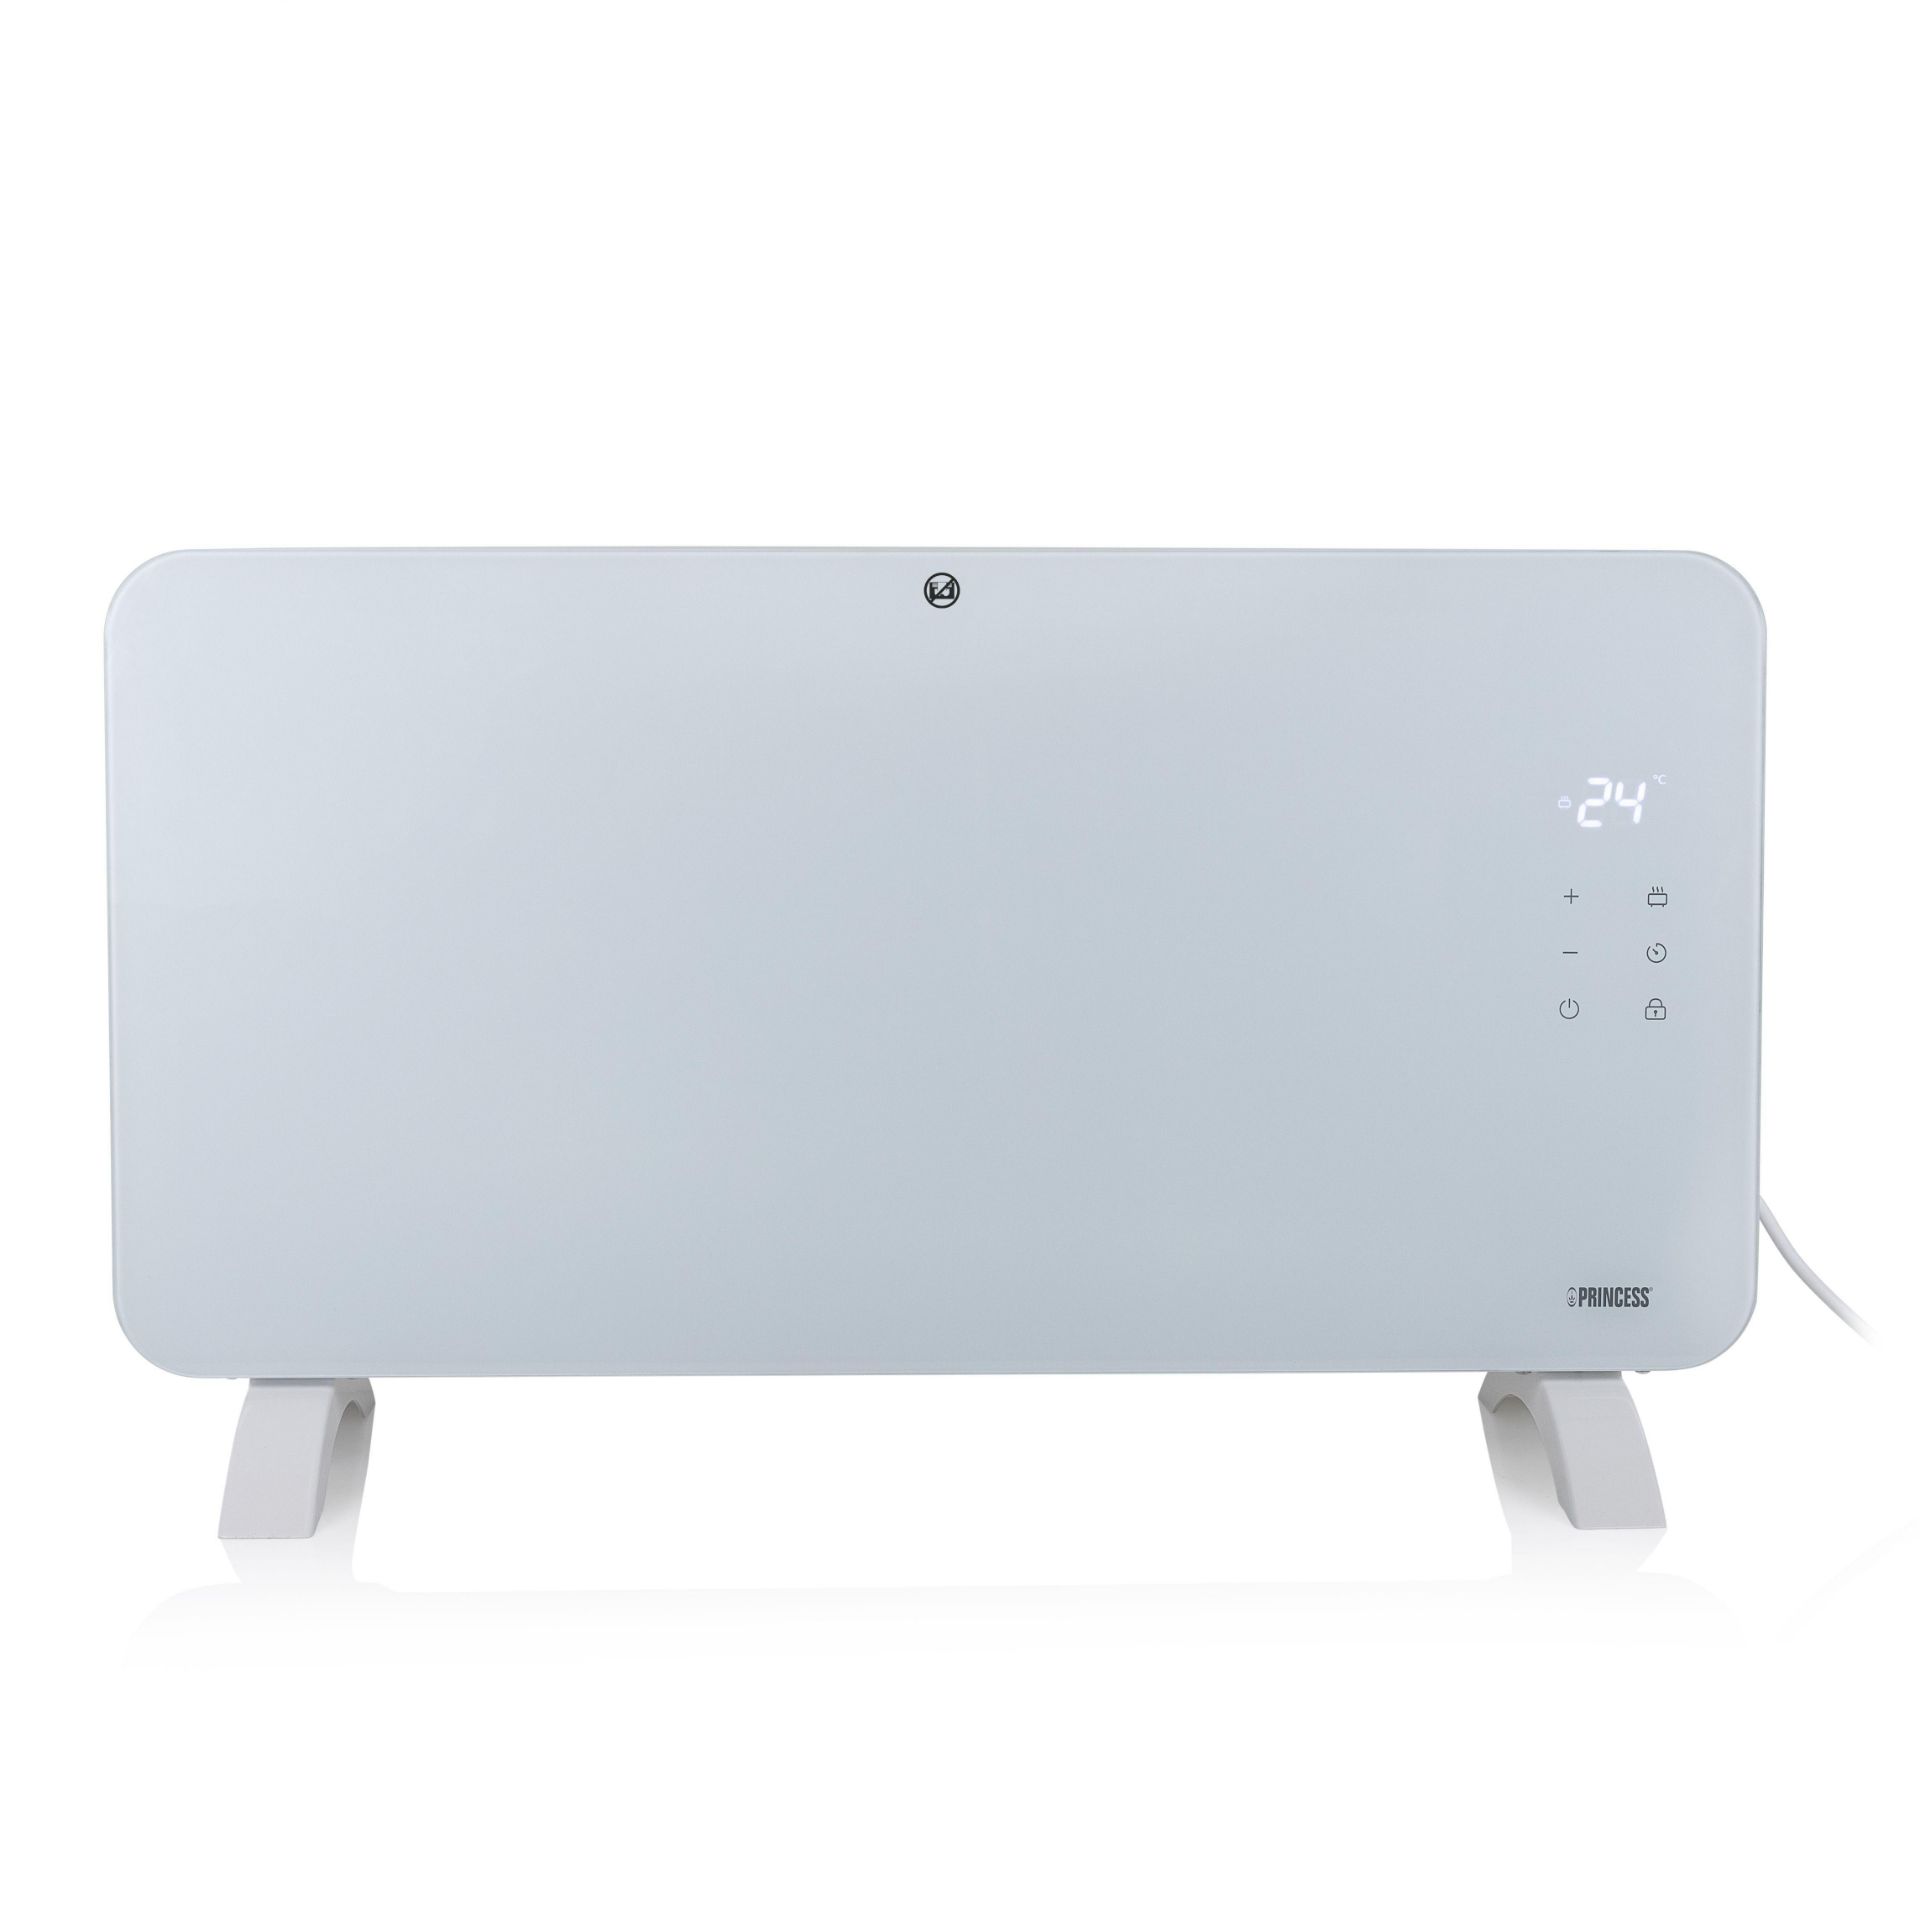 Princess 1500W White Smart Panel Heater (LOCATION - H/S 2.1.1) Suitable for any room in the house,